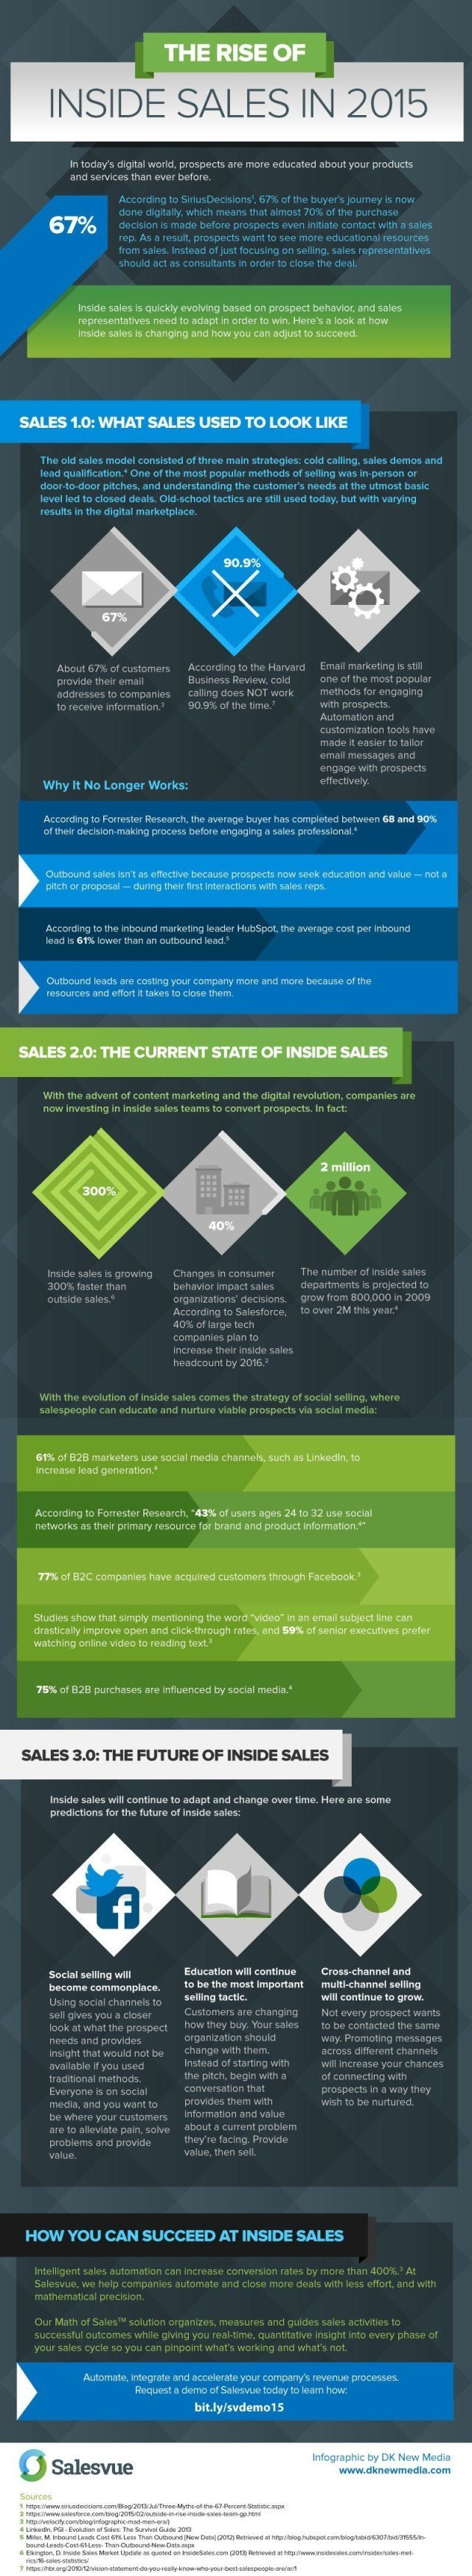 inside-sales-stats-2015-infographic